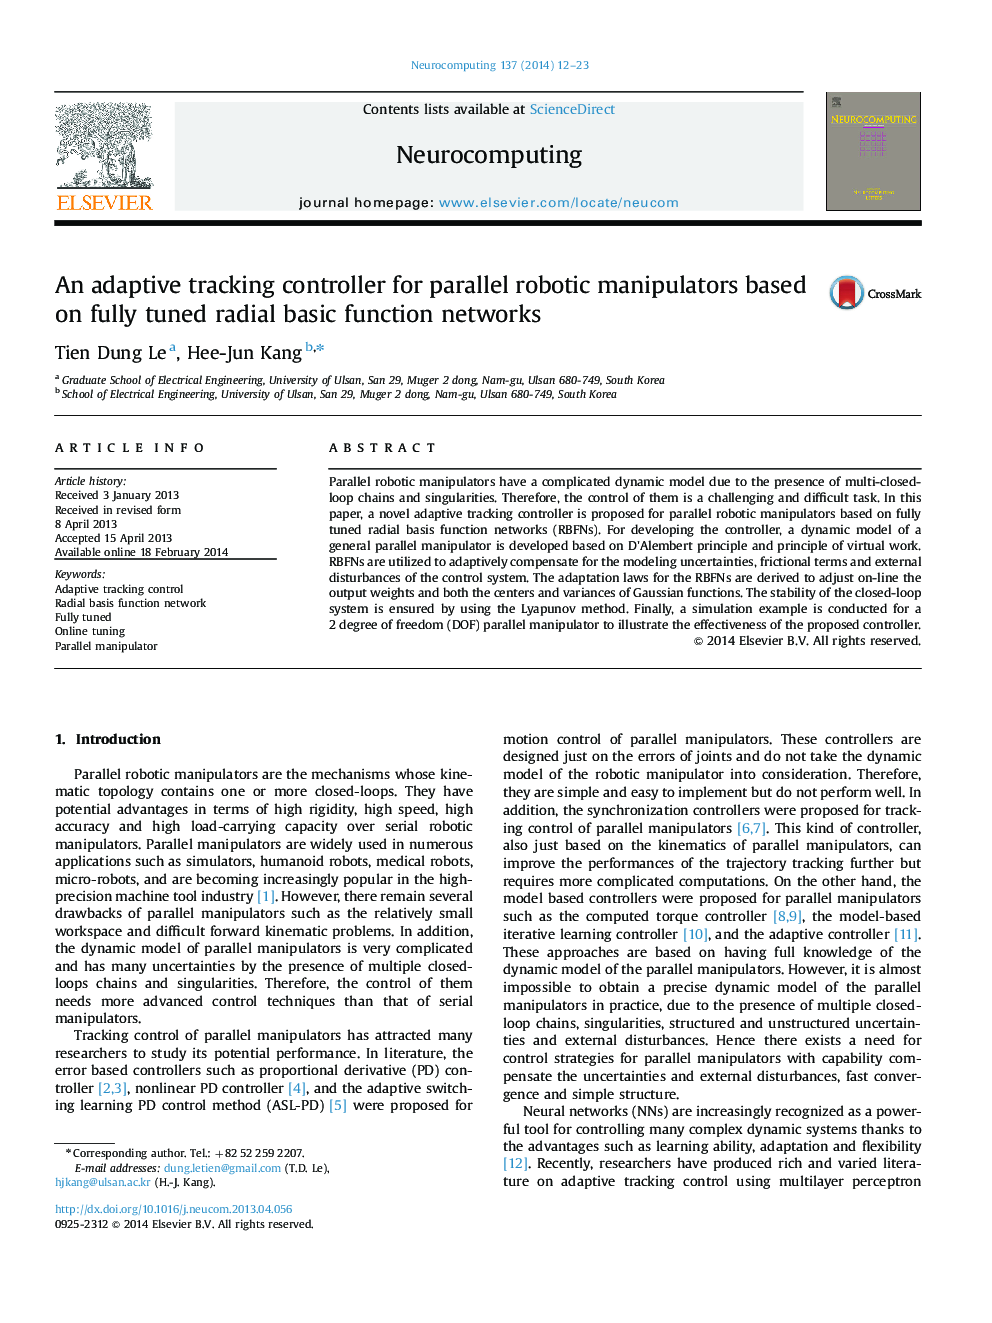 An adaptive tracking controller for parallel robotic manipulators based on fully tuned radial basic function networks